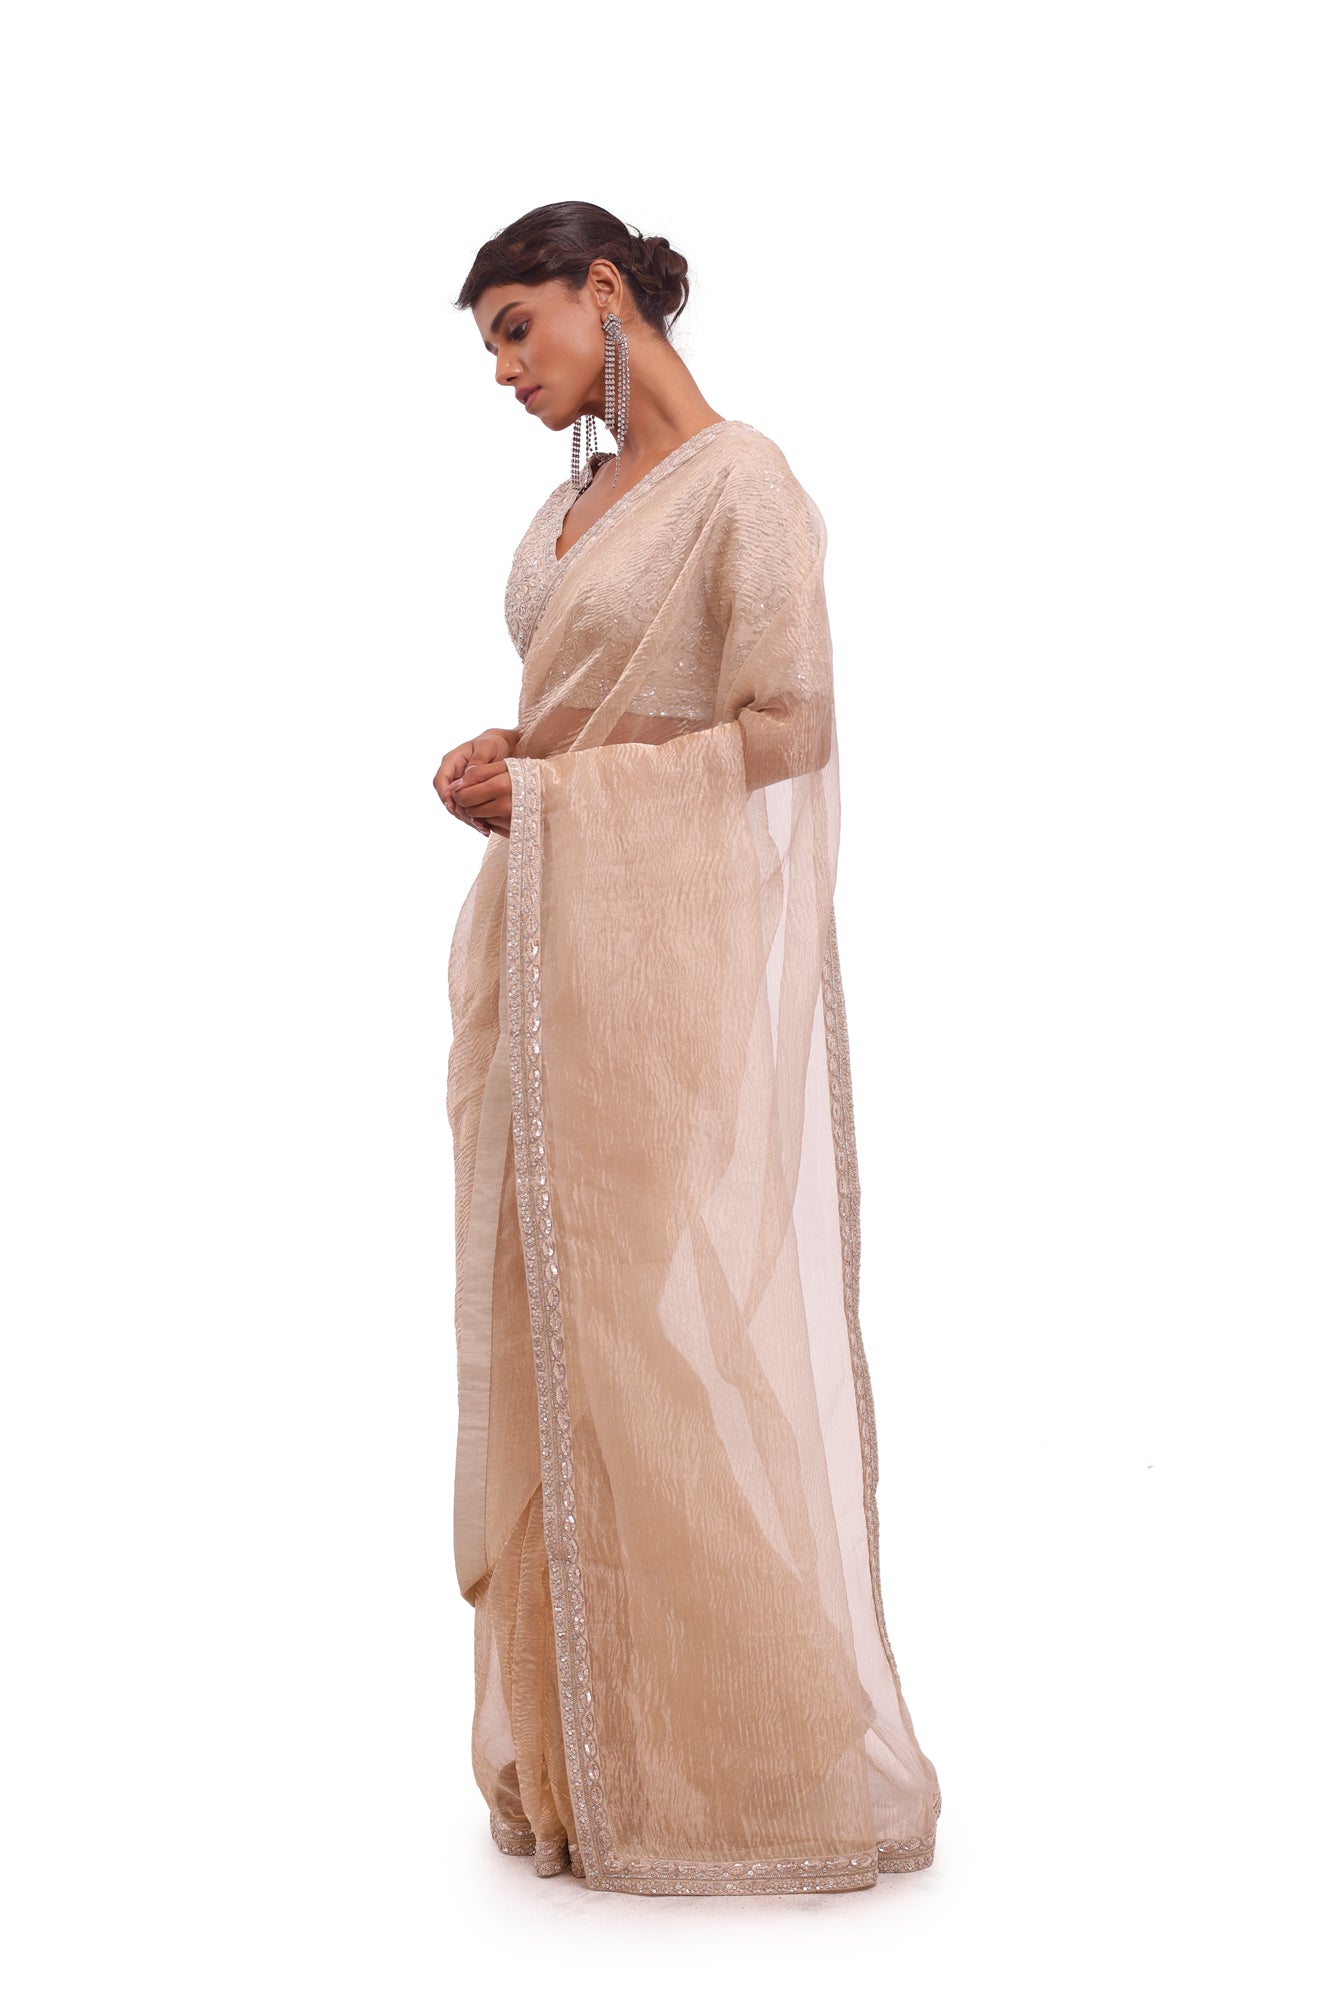 Buy golden crinkled tissue saree online in USA with embroidered saree blouse. Look your best at parties and weddings in beautiful designer sarees, embroidered sarees, handwoven sarees, silk sarees, organza saris from Pure Elegance Indian saree store in USA.-saree